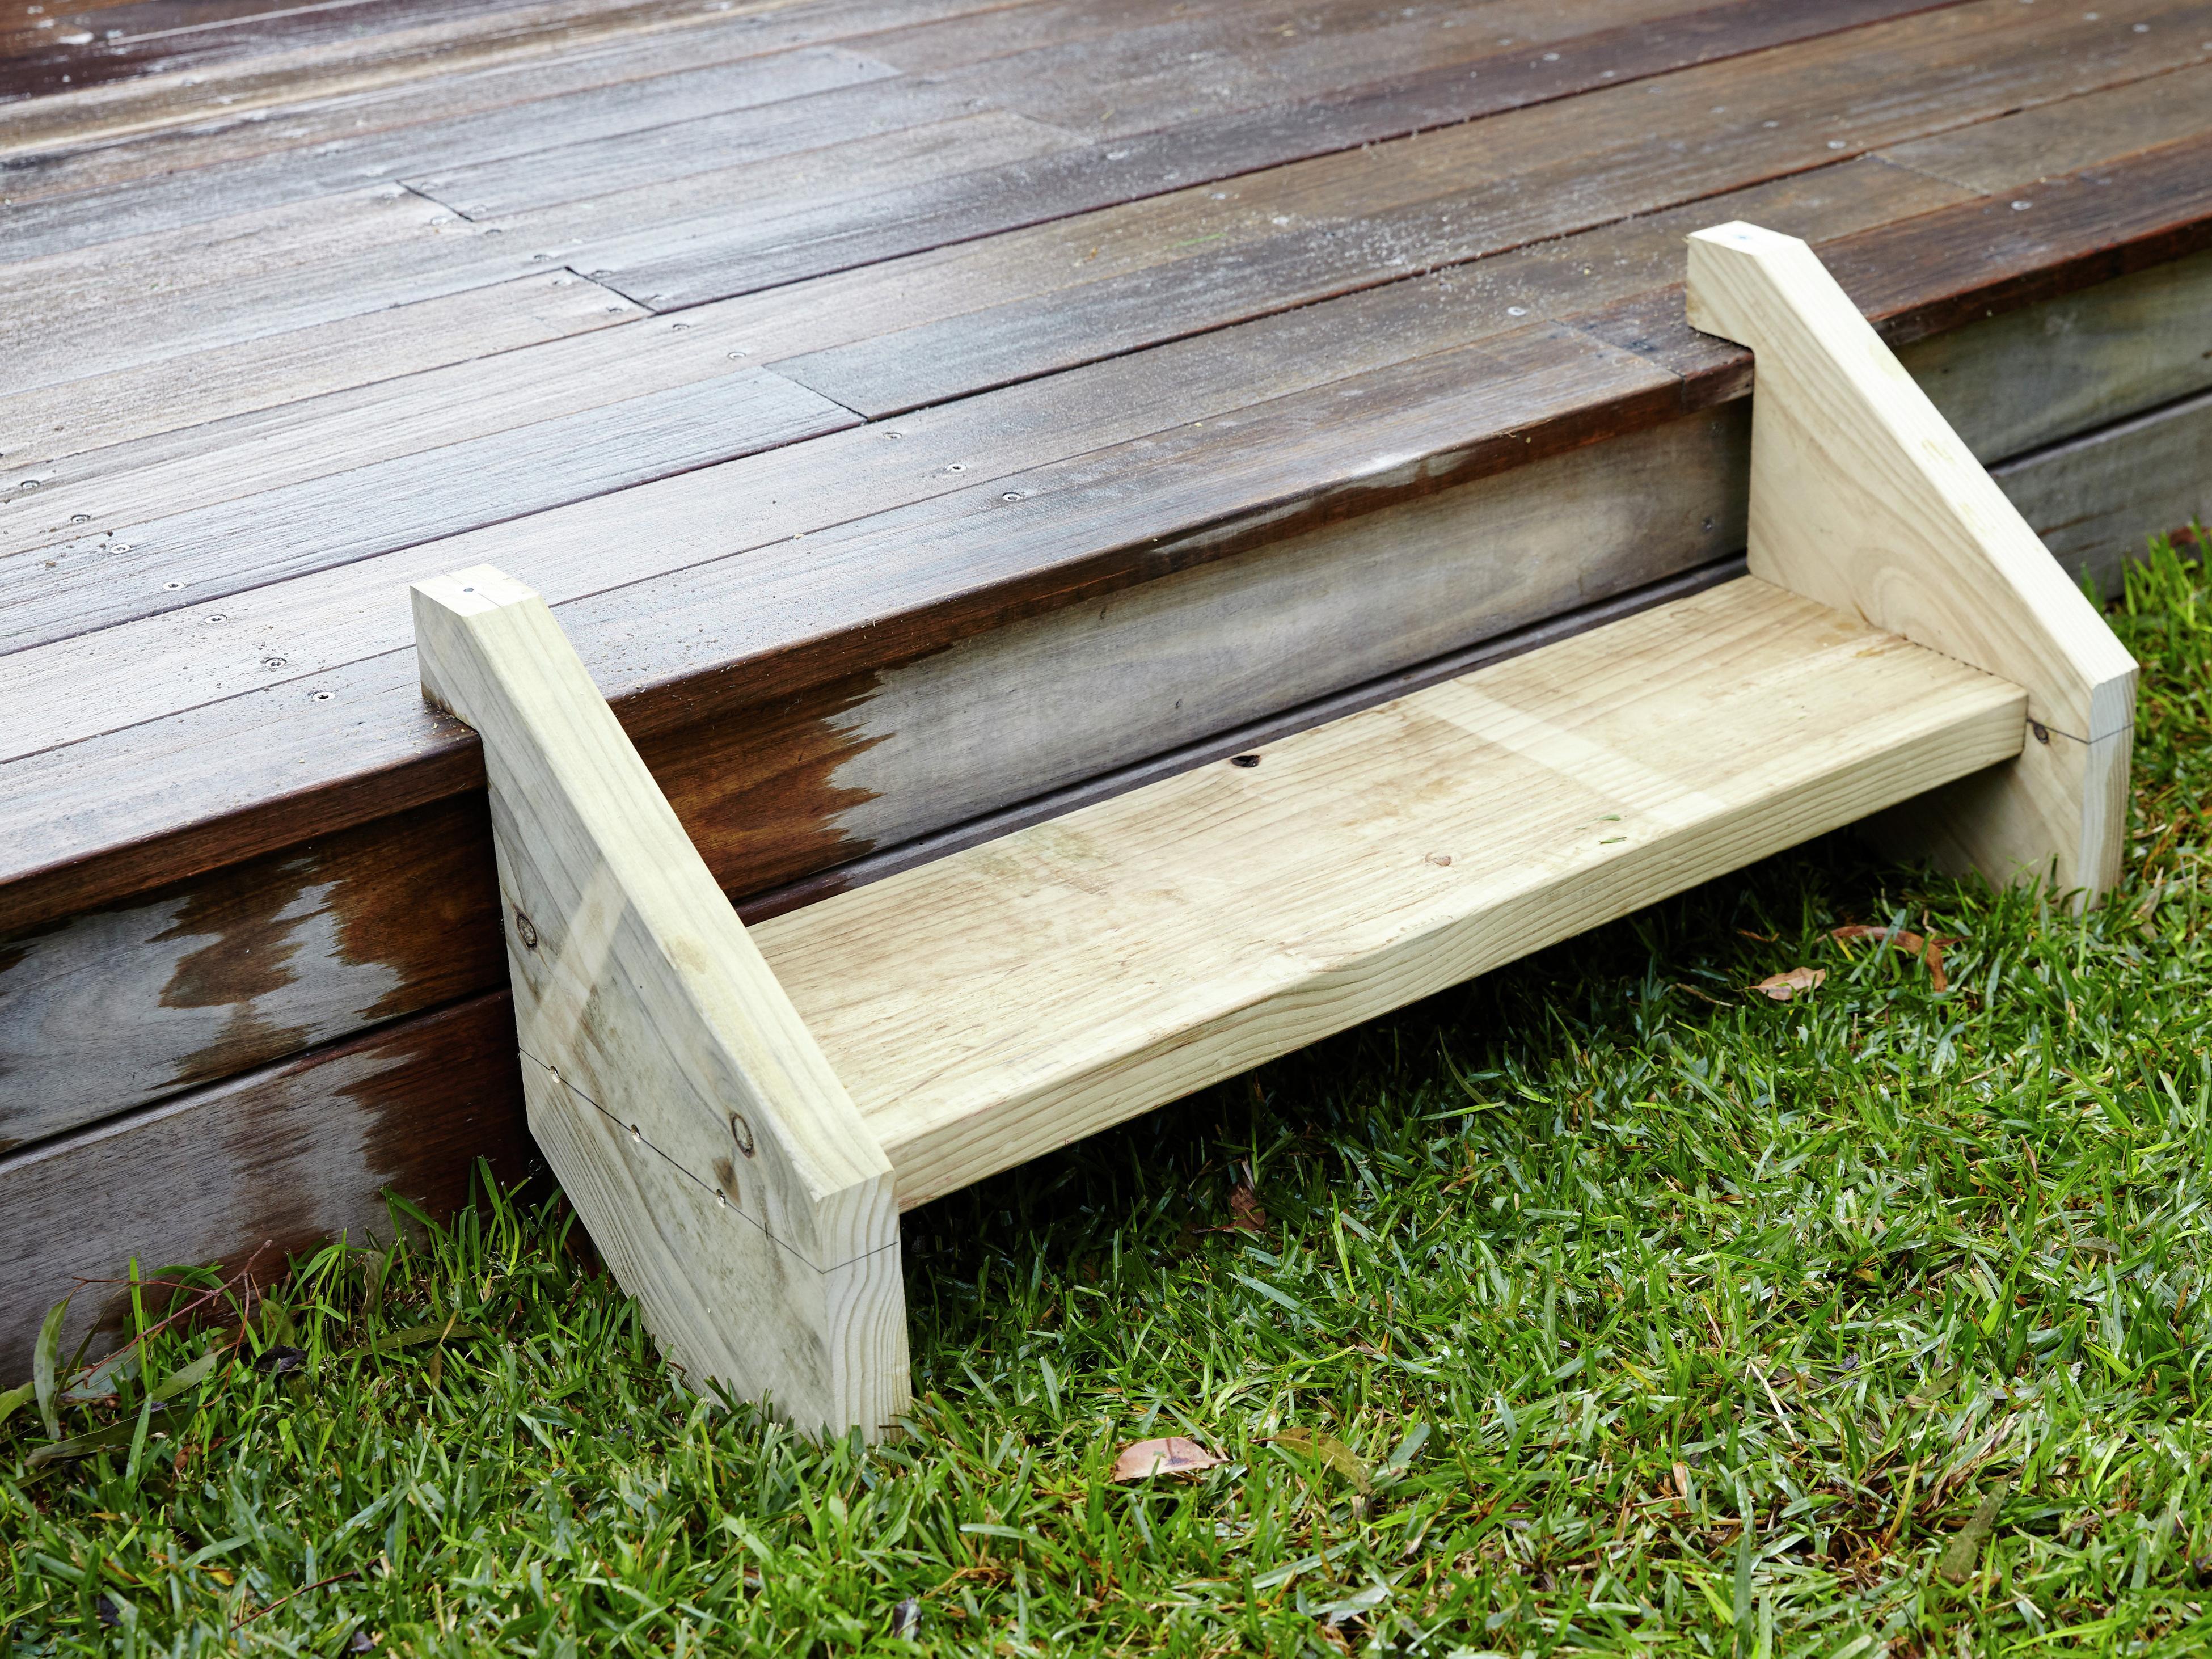 How to Build Outdoor Wood Steps